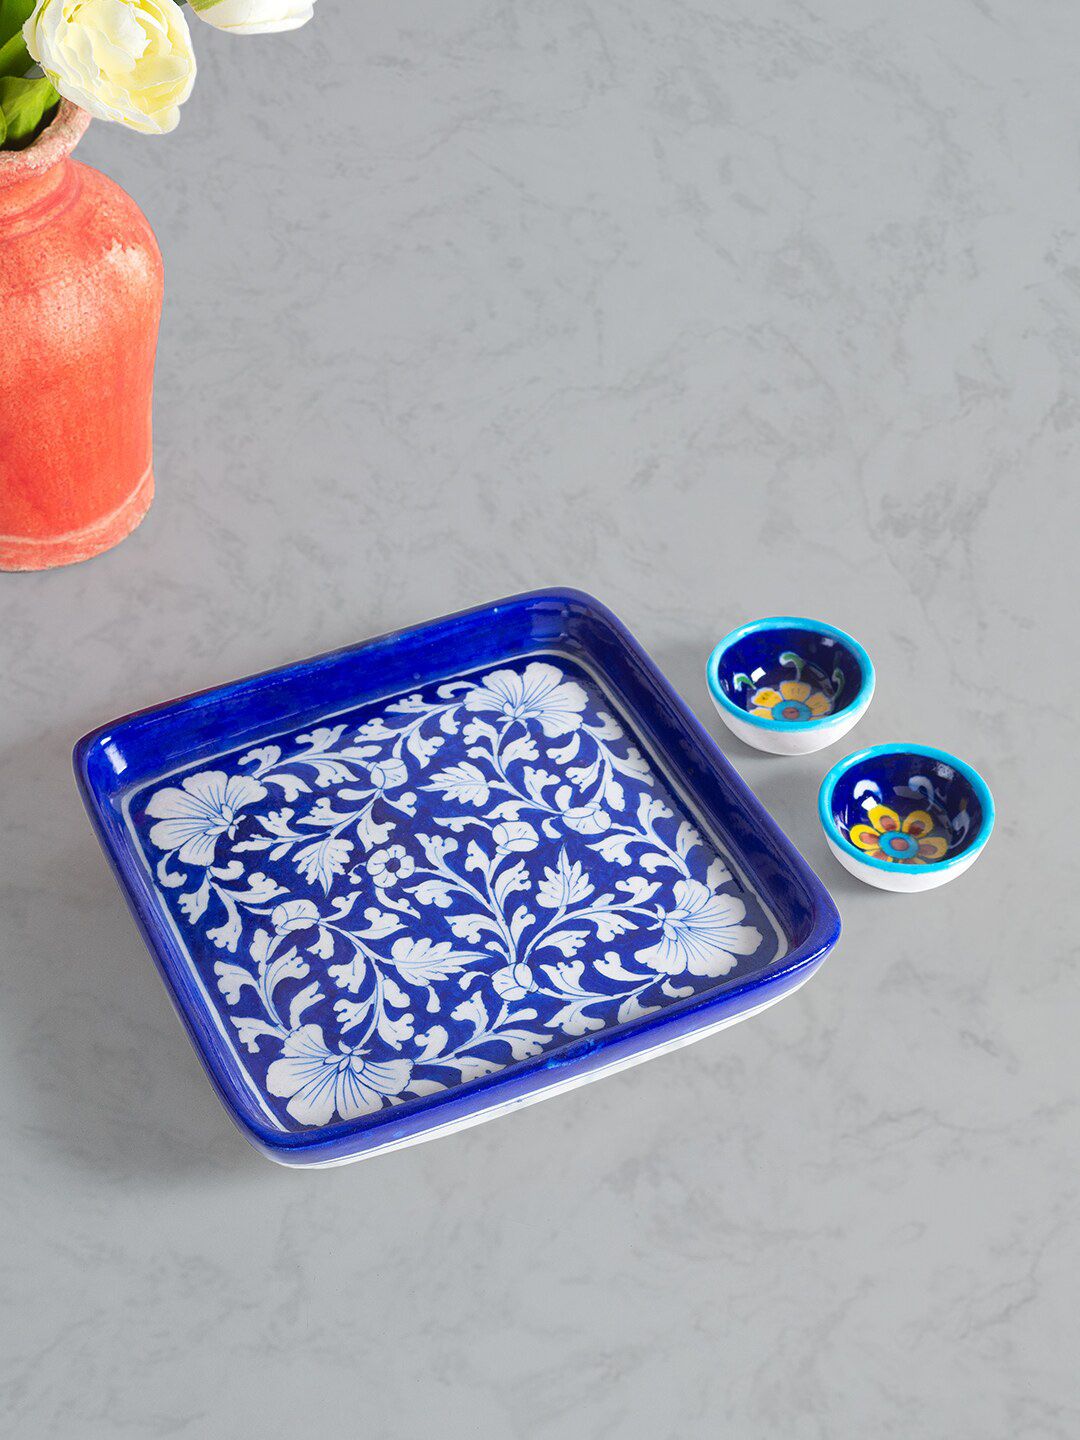 Golden Peacock Set of 3 Blue Floral Pottery Ceramic Trays with Bowls Price in India